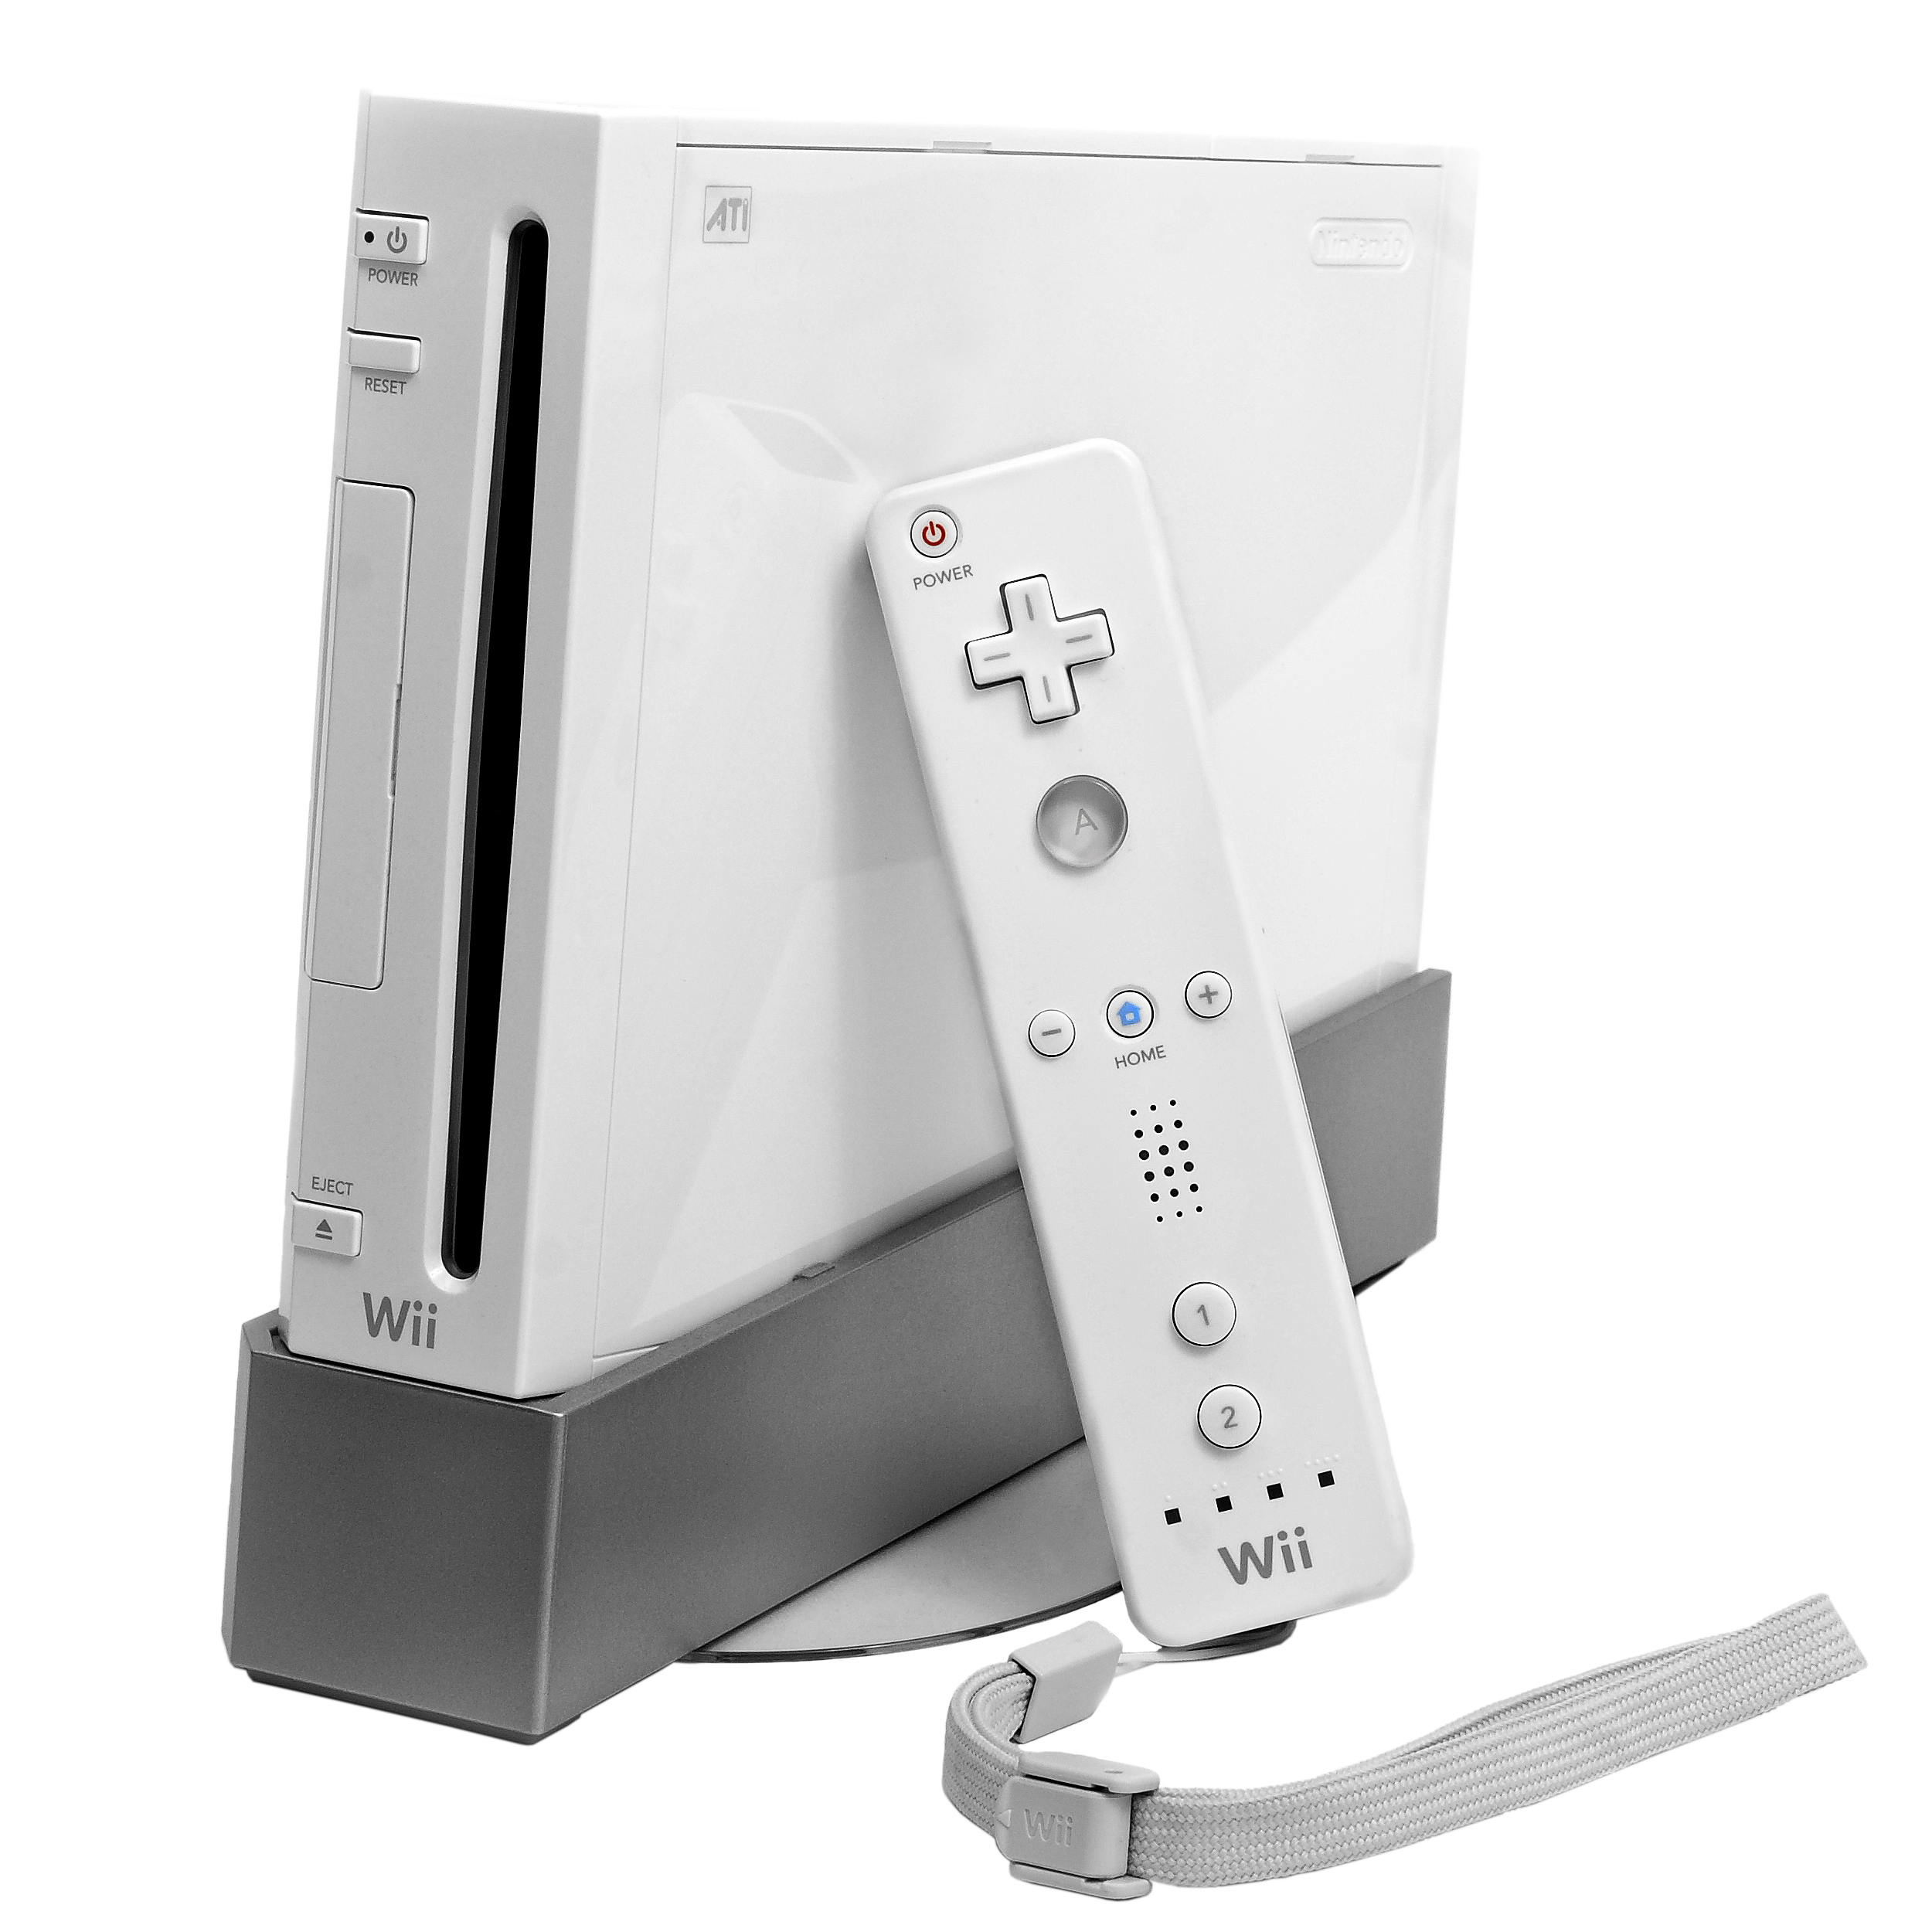 Wii console with network settings menu